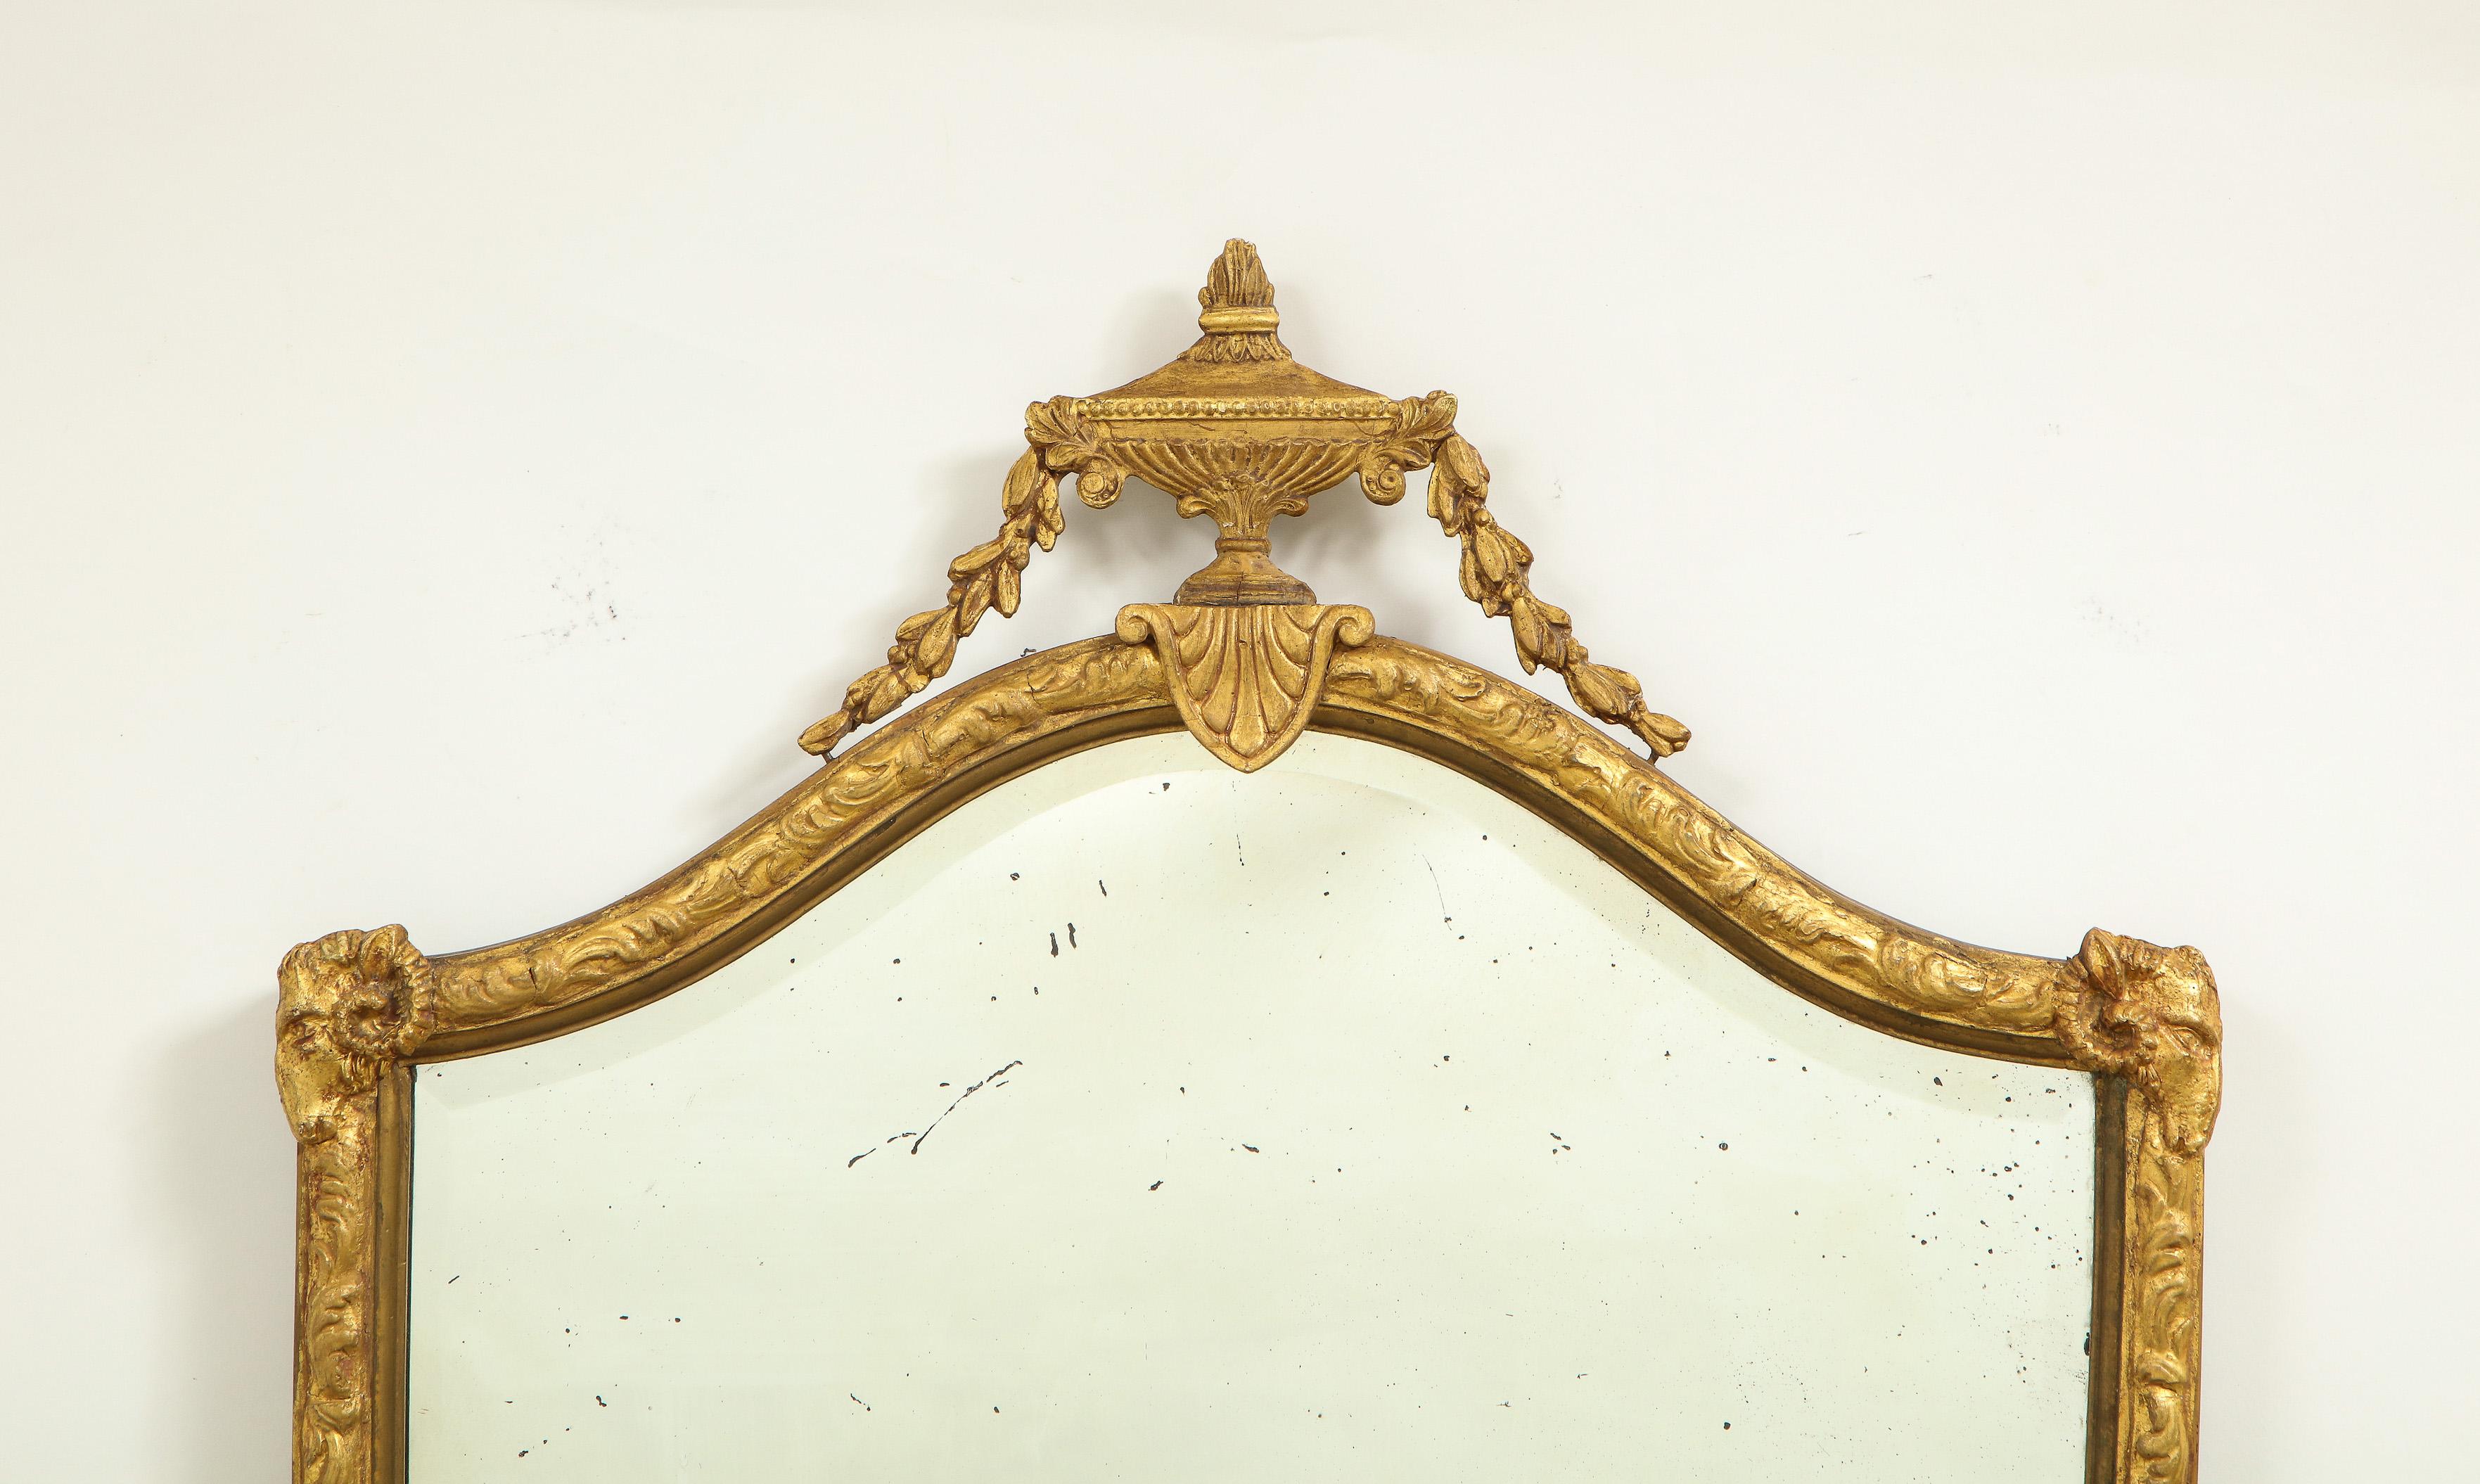 The shield-shaped mirrored plate set within a conforming gilt gesso surround enriched with foliate decoration; surmounted by a bell garland-festooned classical urn resting on a paterae lambrequin.